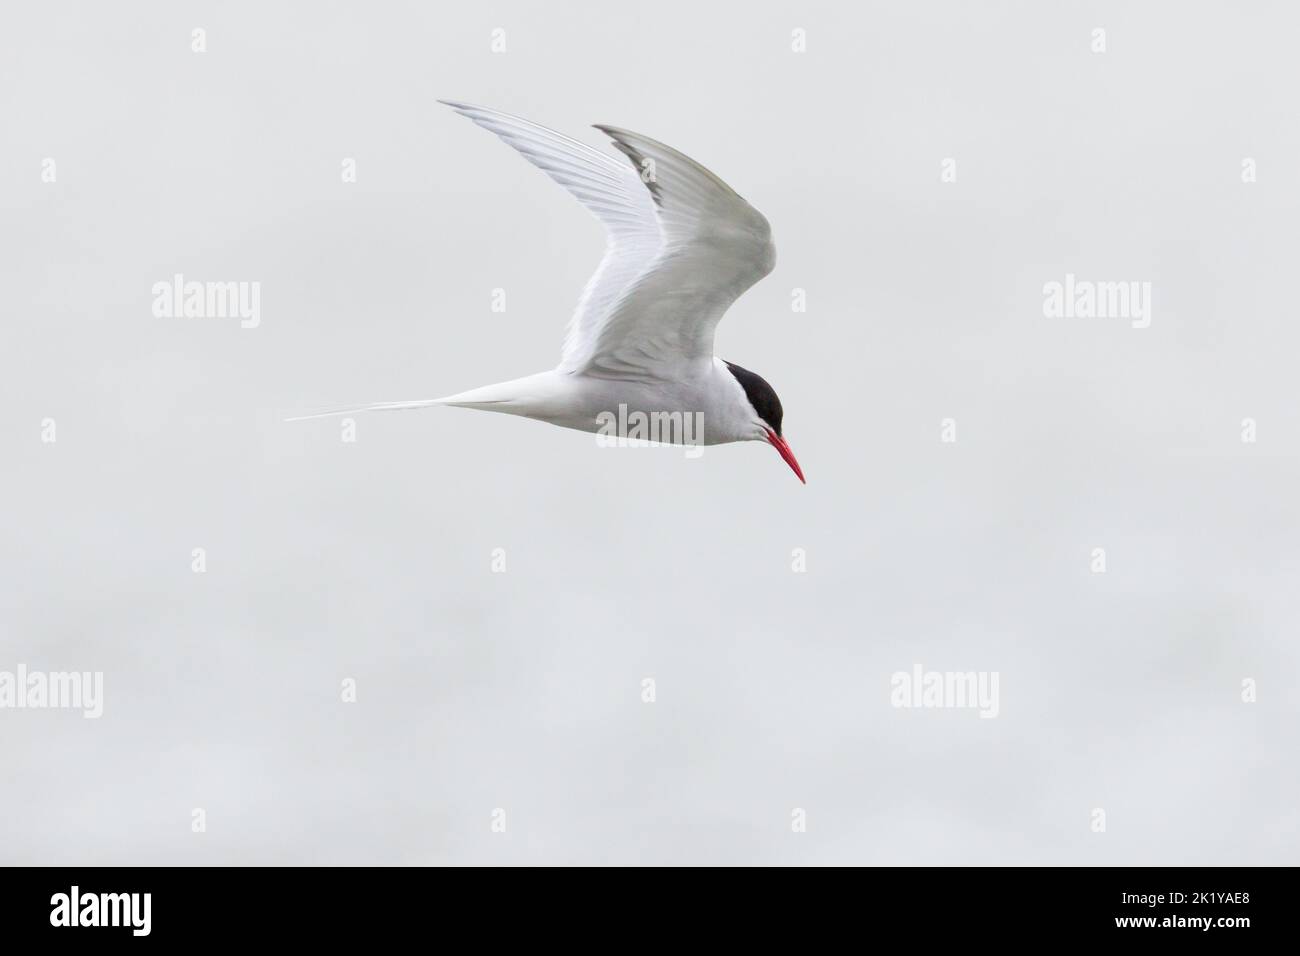 arctic tern flying with spread wings Stock Photo